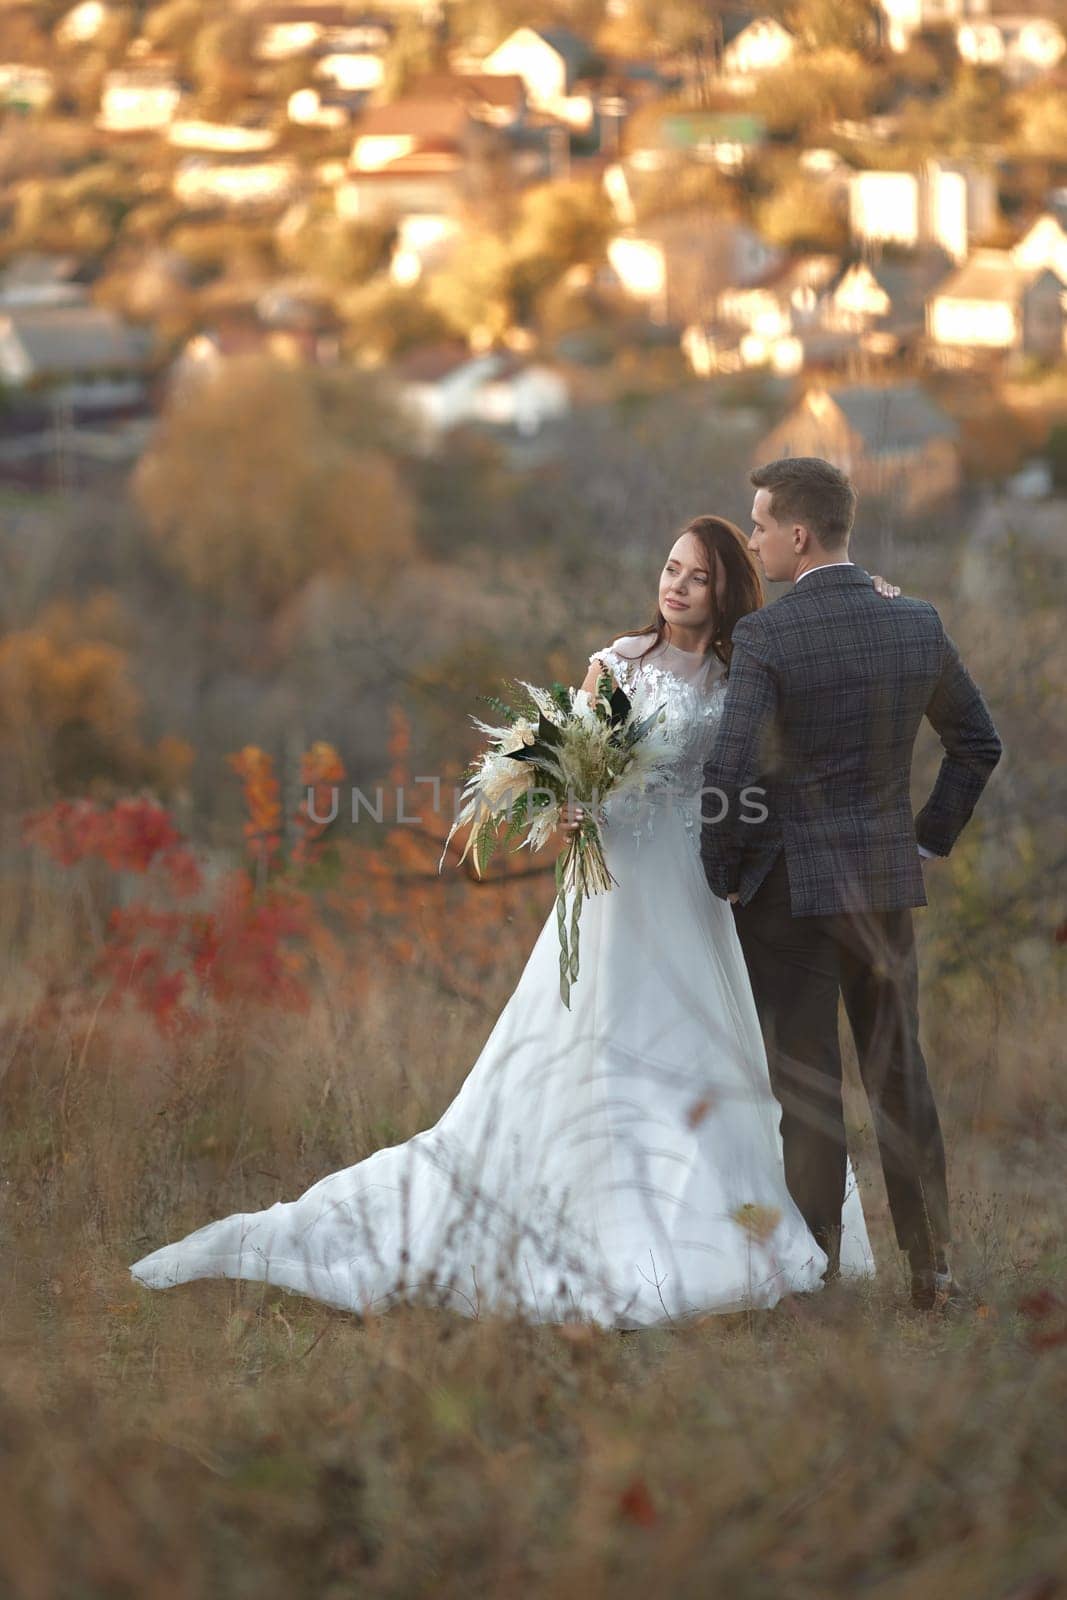 beautiful wedding couple together standing outdoor on natural background